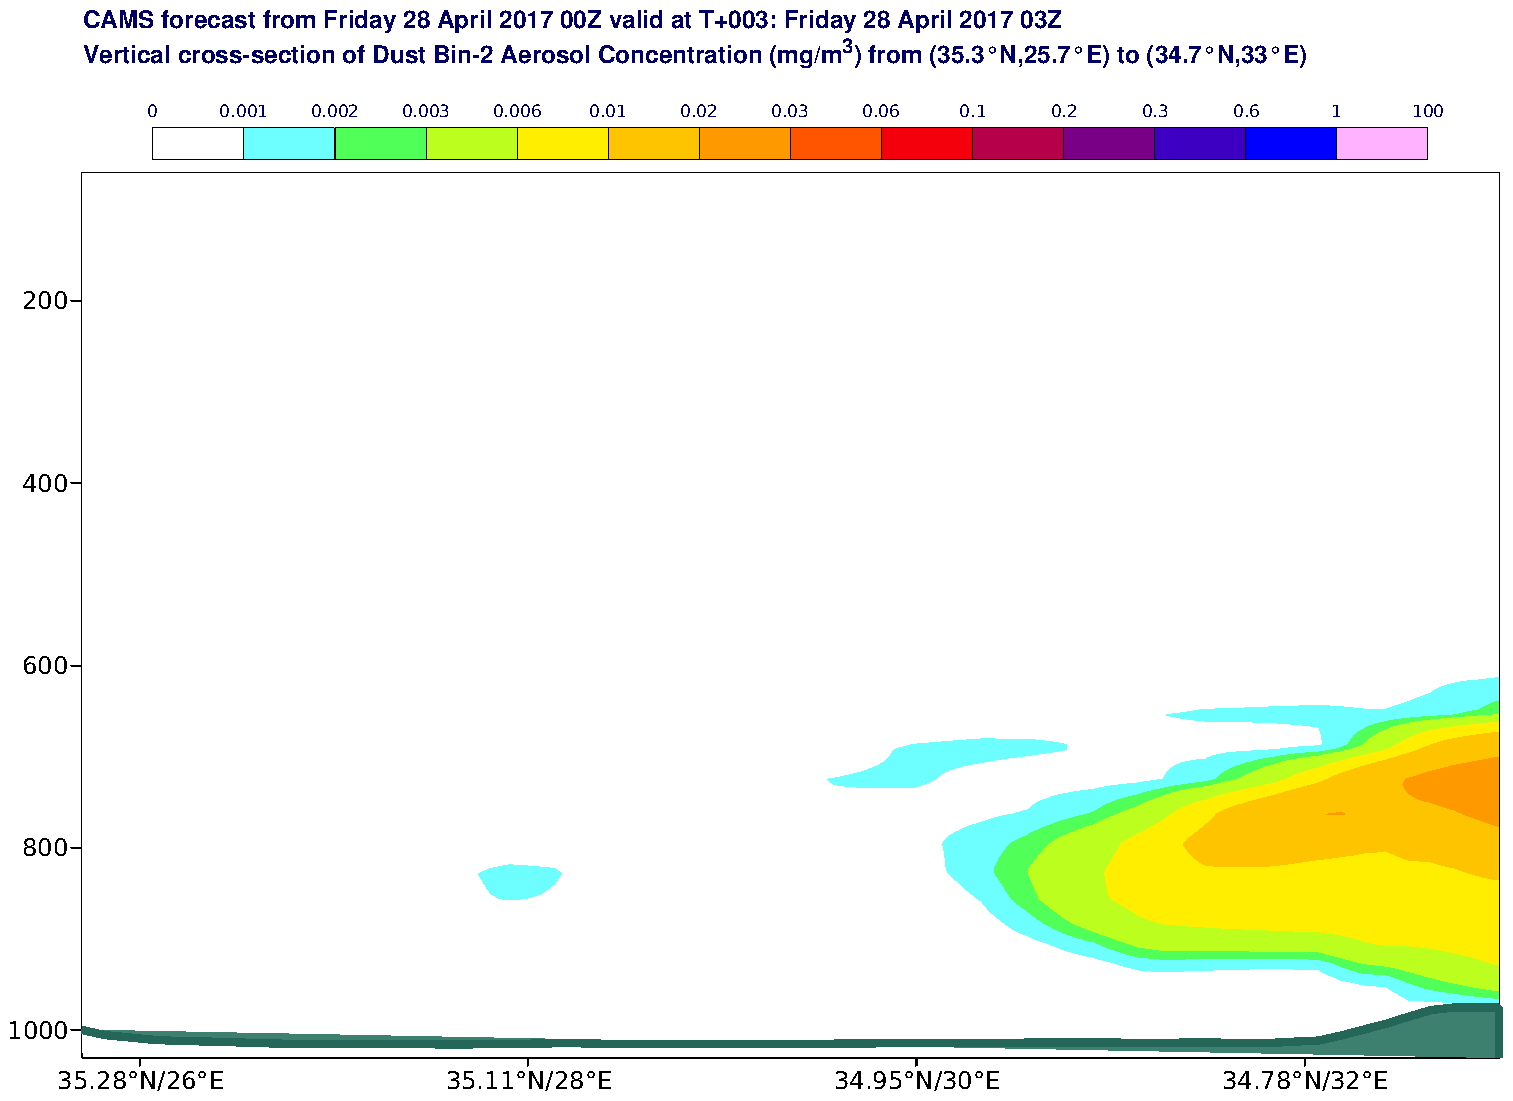 Vertical cross-section of Dust Bin-2 Aerosol Concentration (mg/m3) valid at T3 - 2017-04-28 03:00